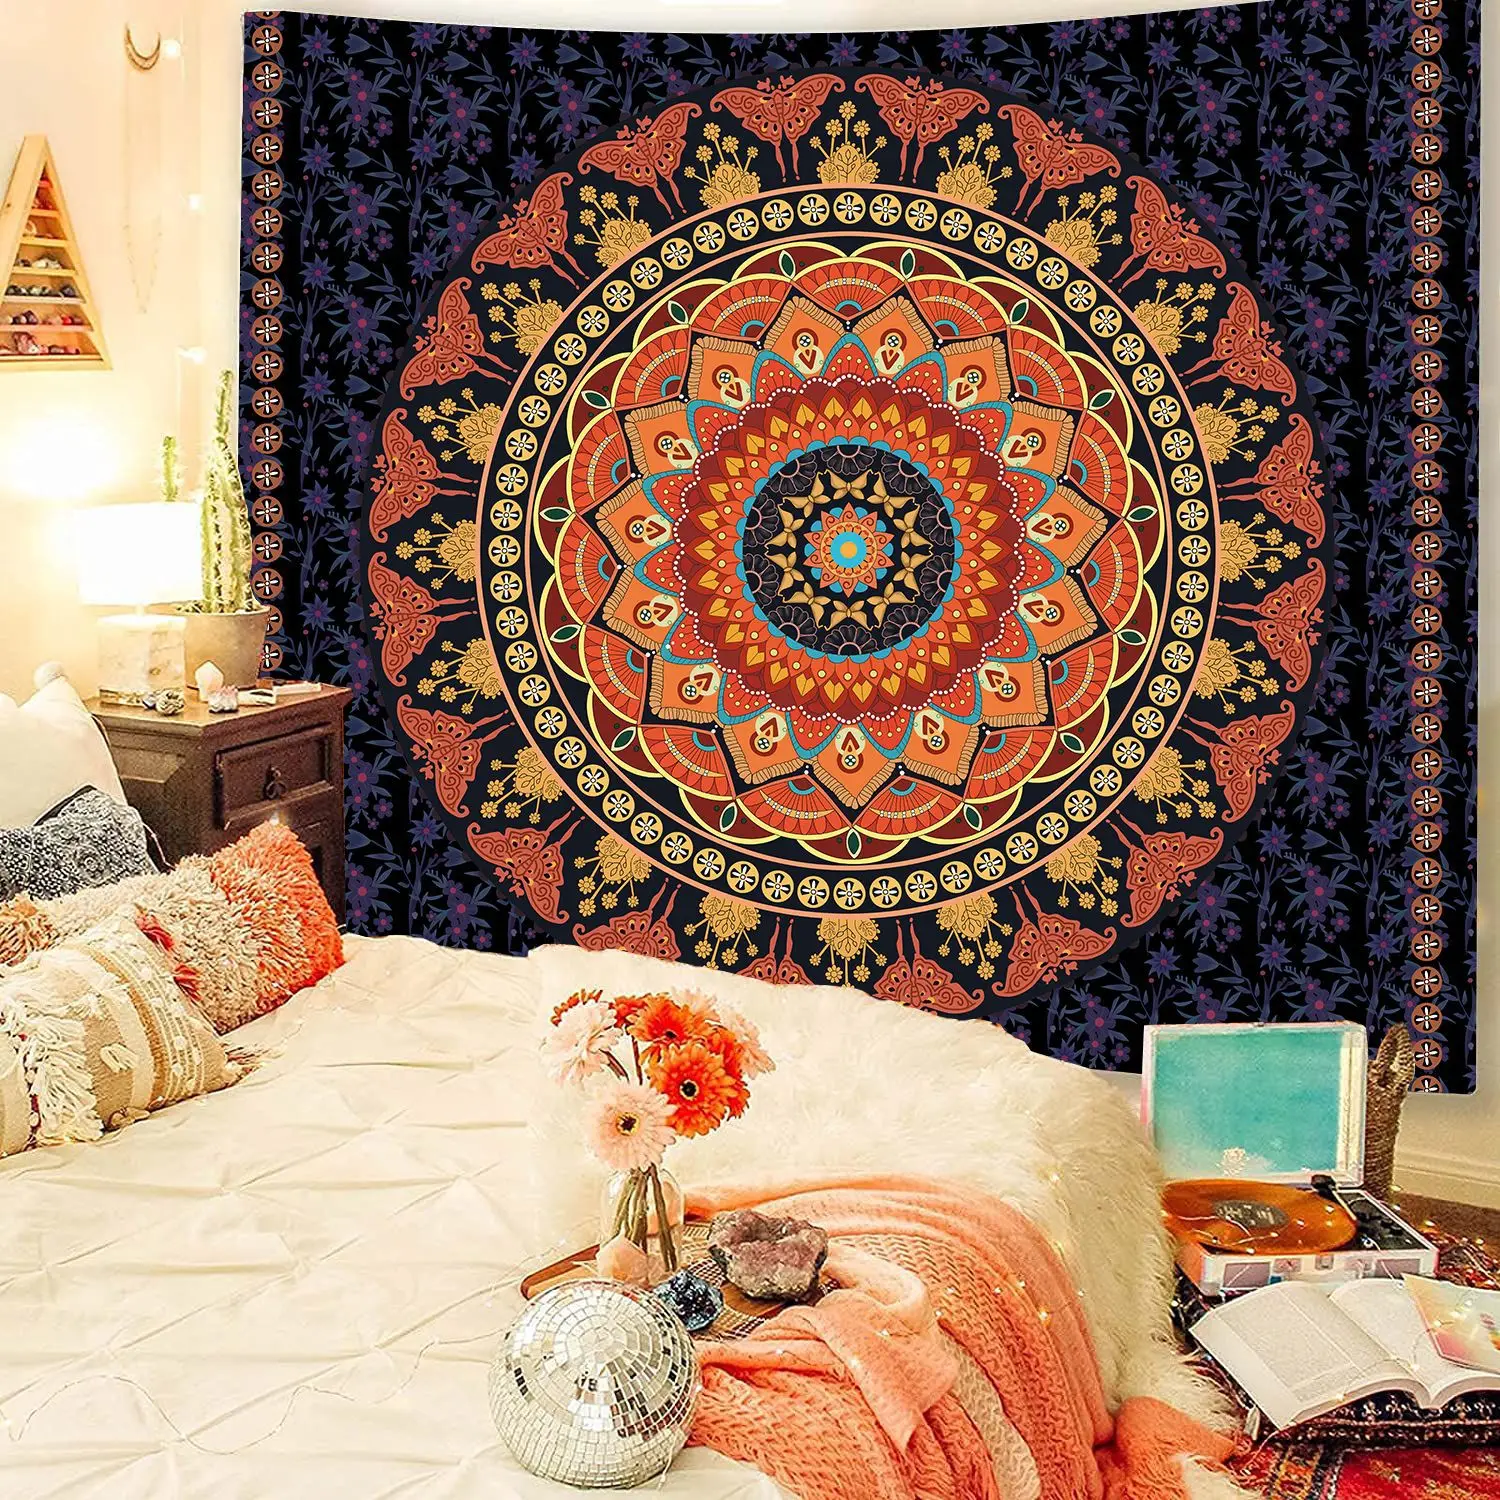 

Floral Mandala Tapestry Wall Hanging India Hippie Boho Home Dorm Wall Decor HD Printed Art Wall Cloth Tapestries for Room Decor